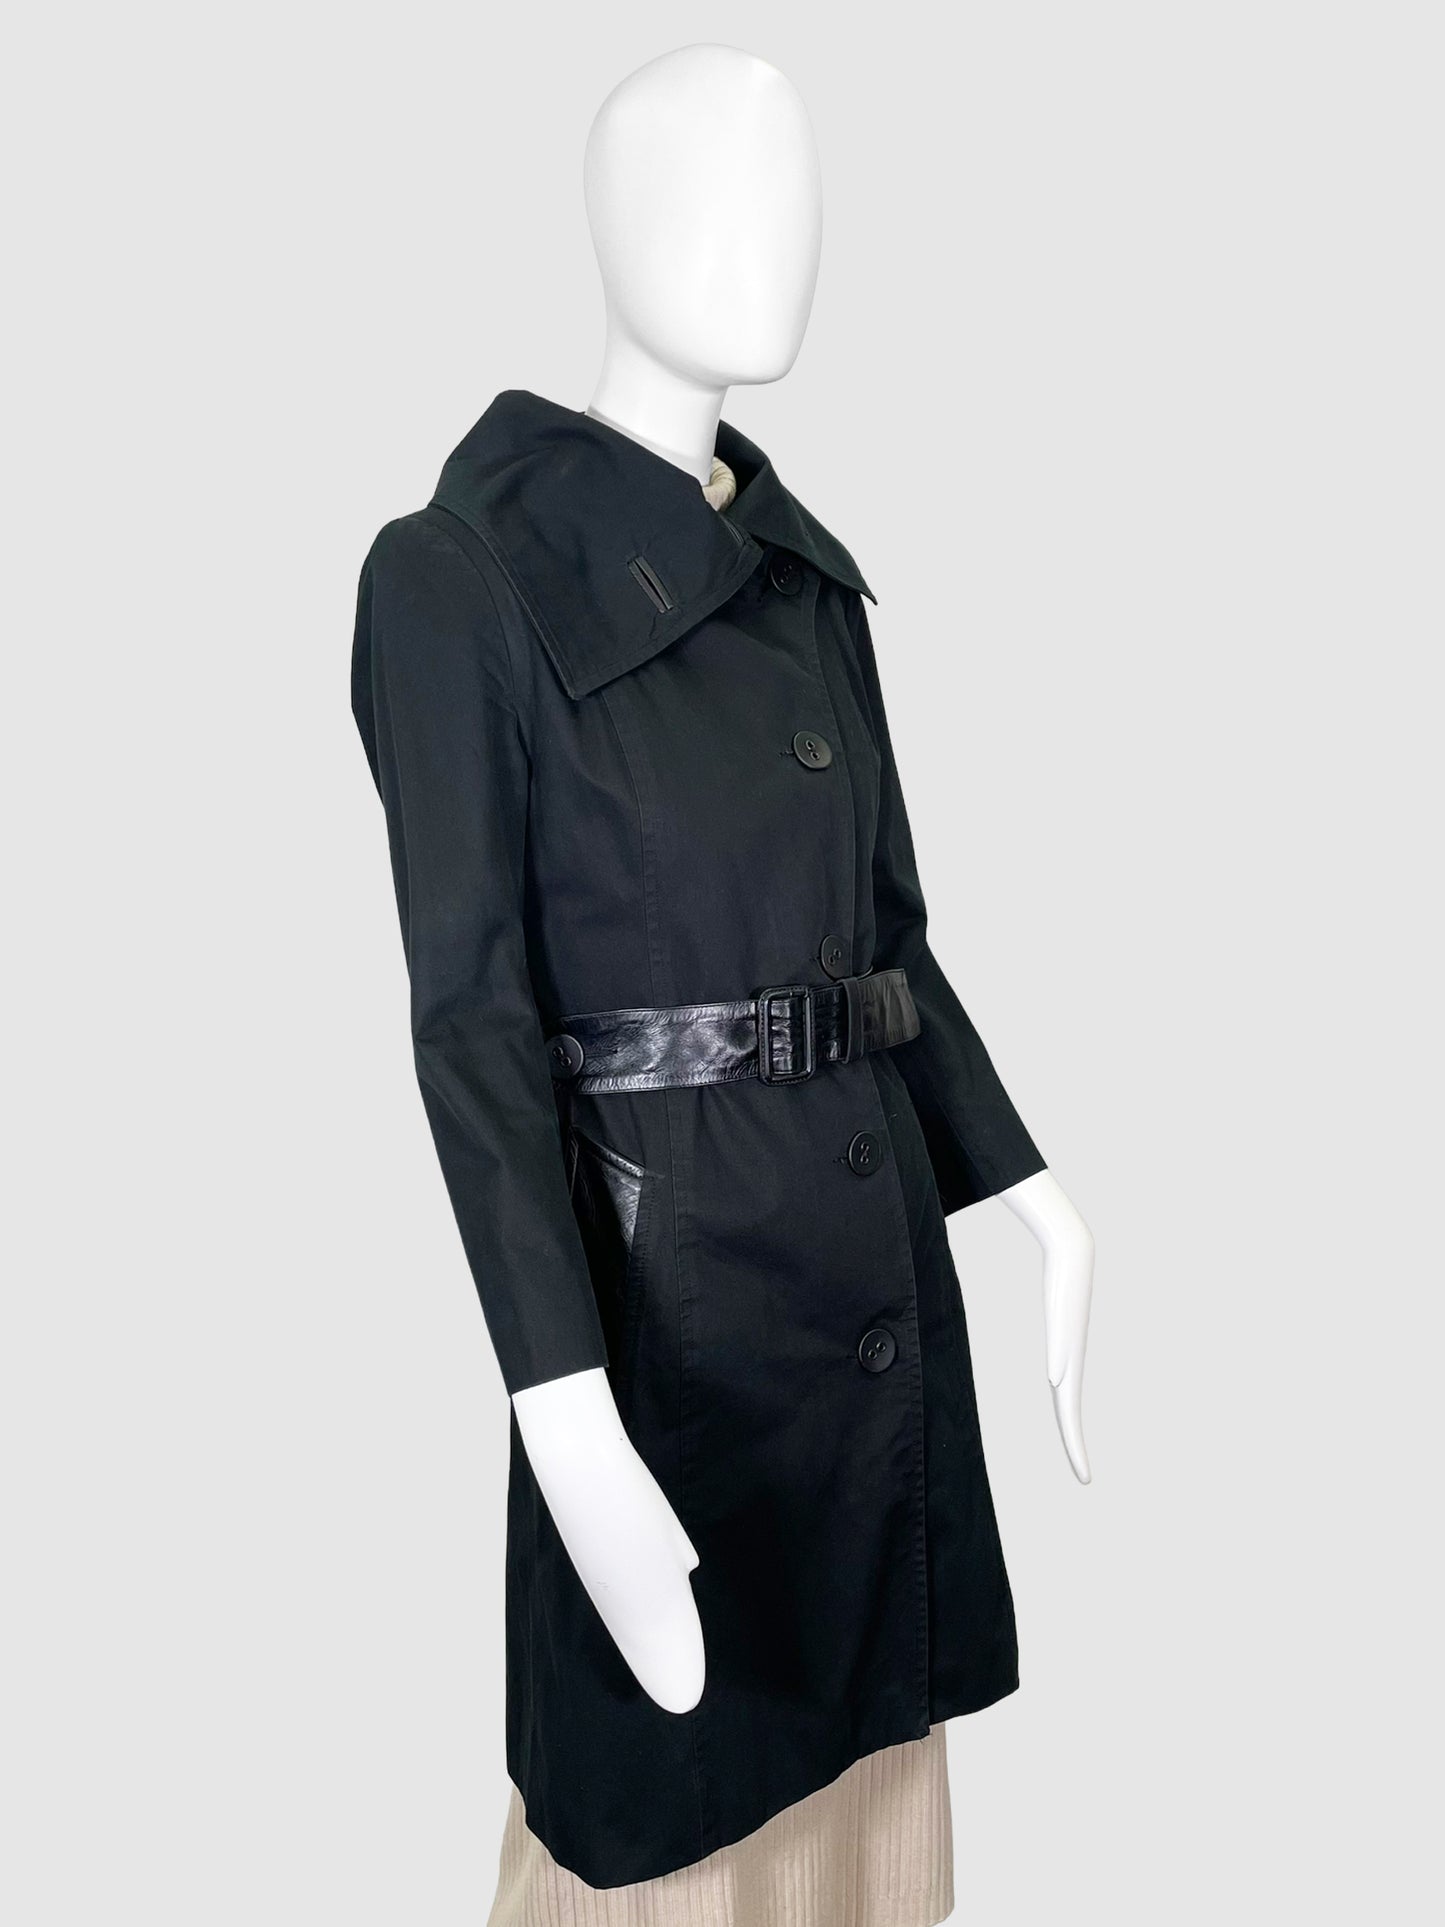 Mackage Trench Coat - Size XS